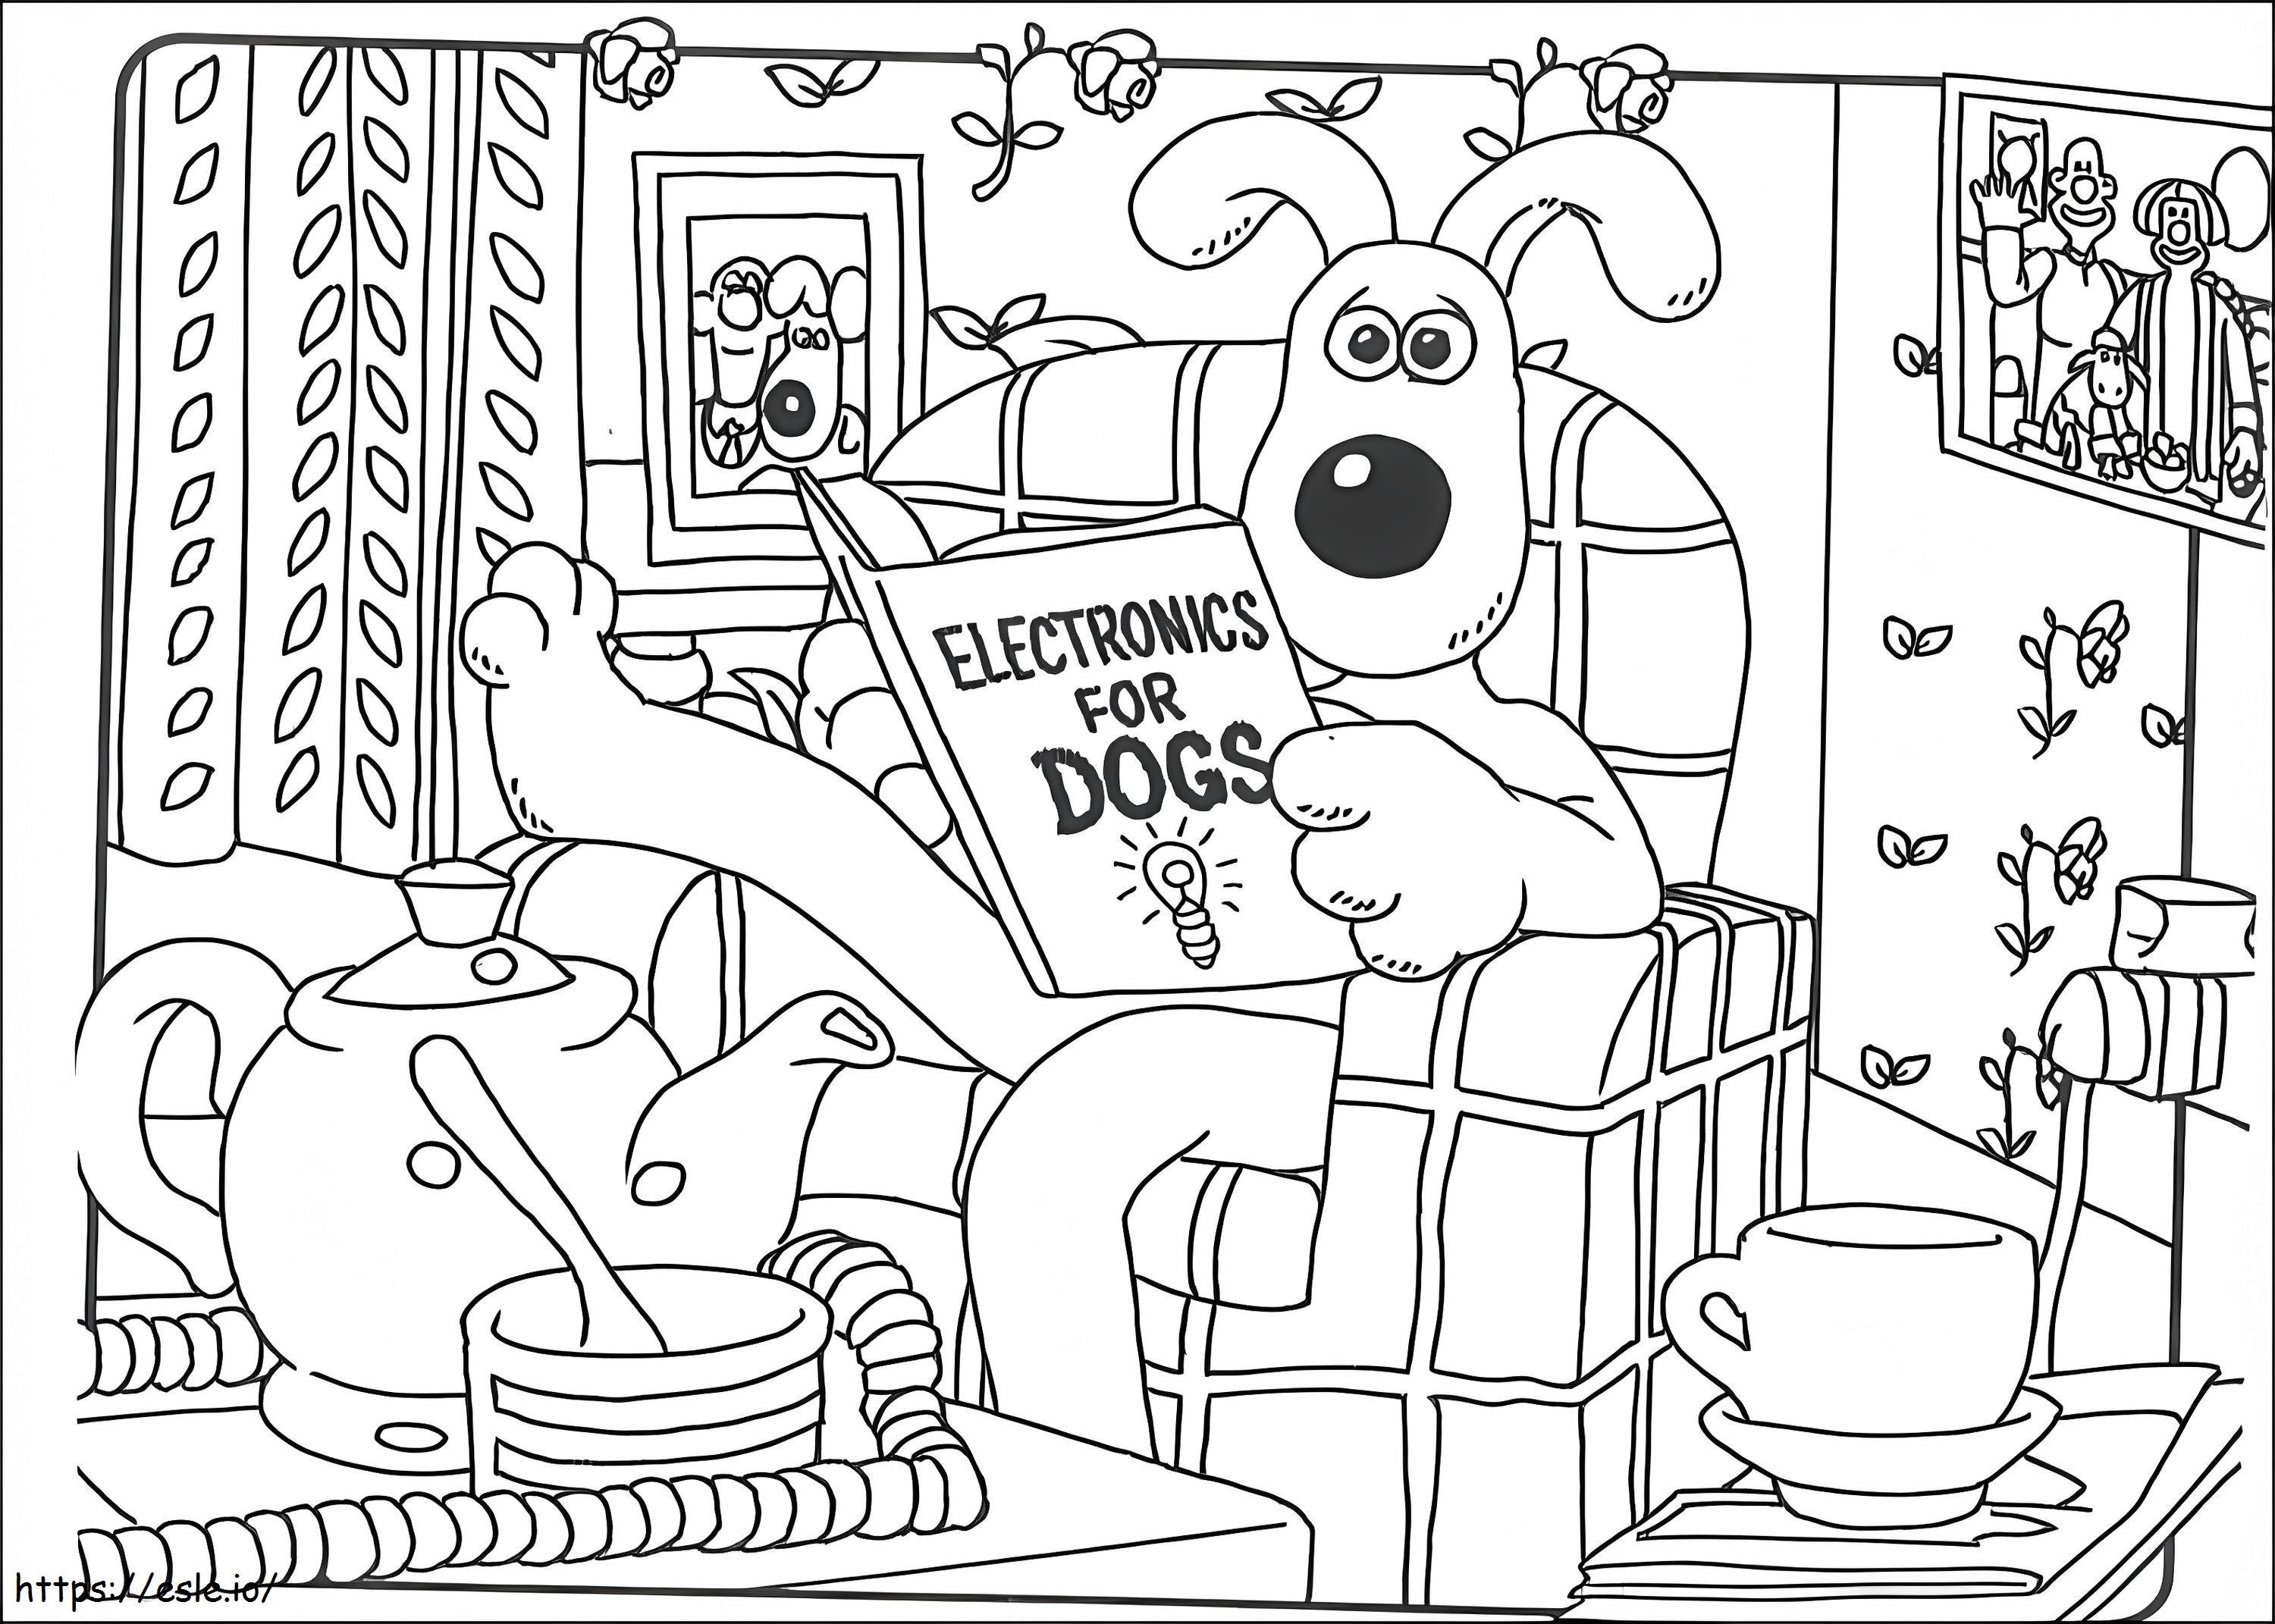 Gromit Reading Book coloring page